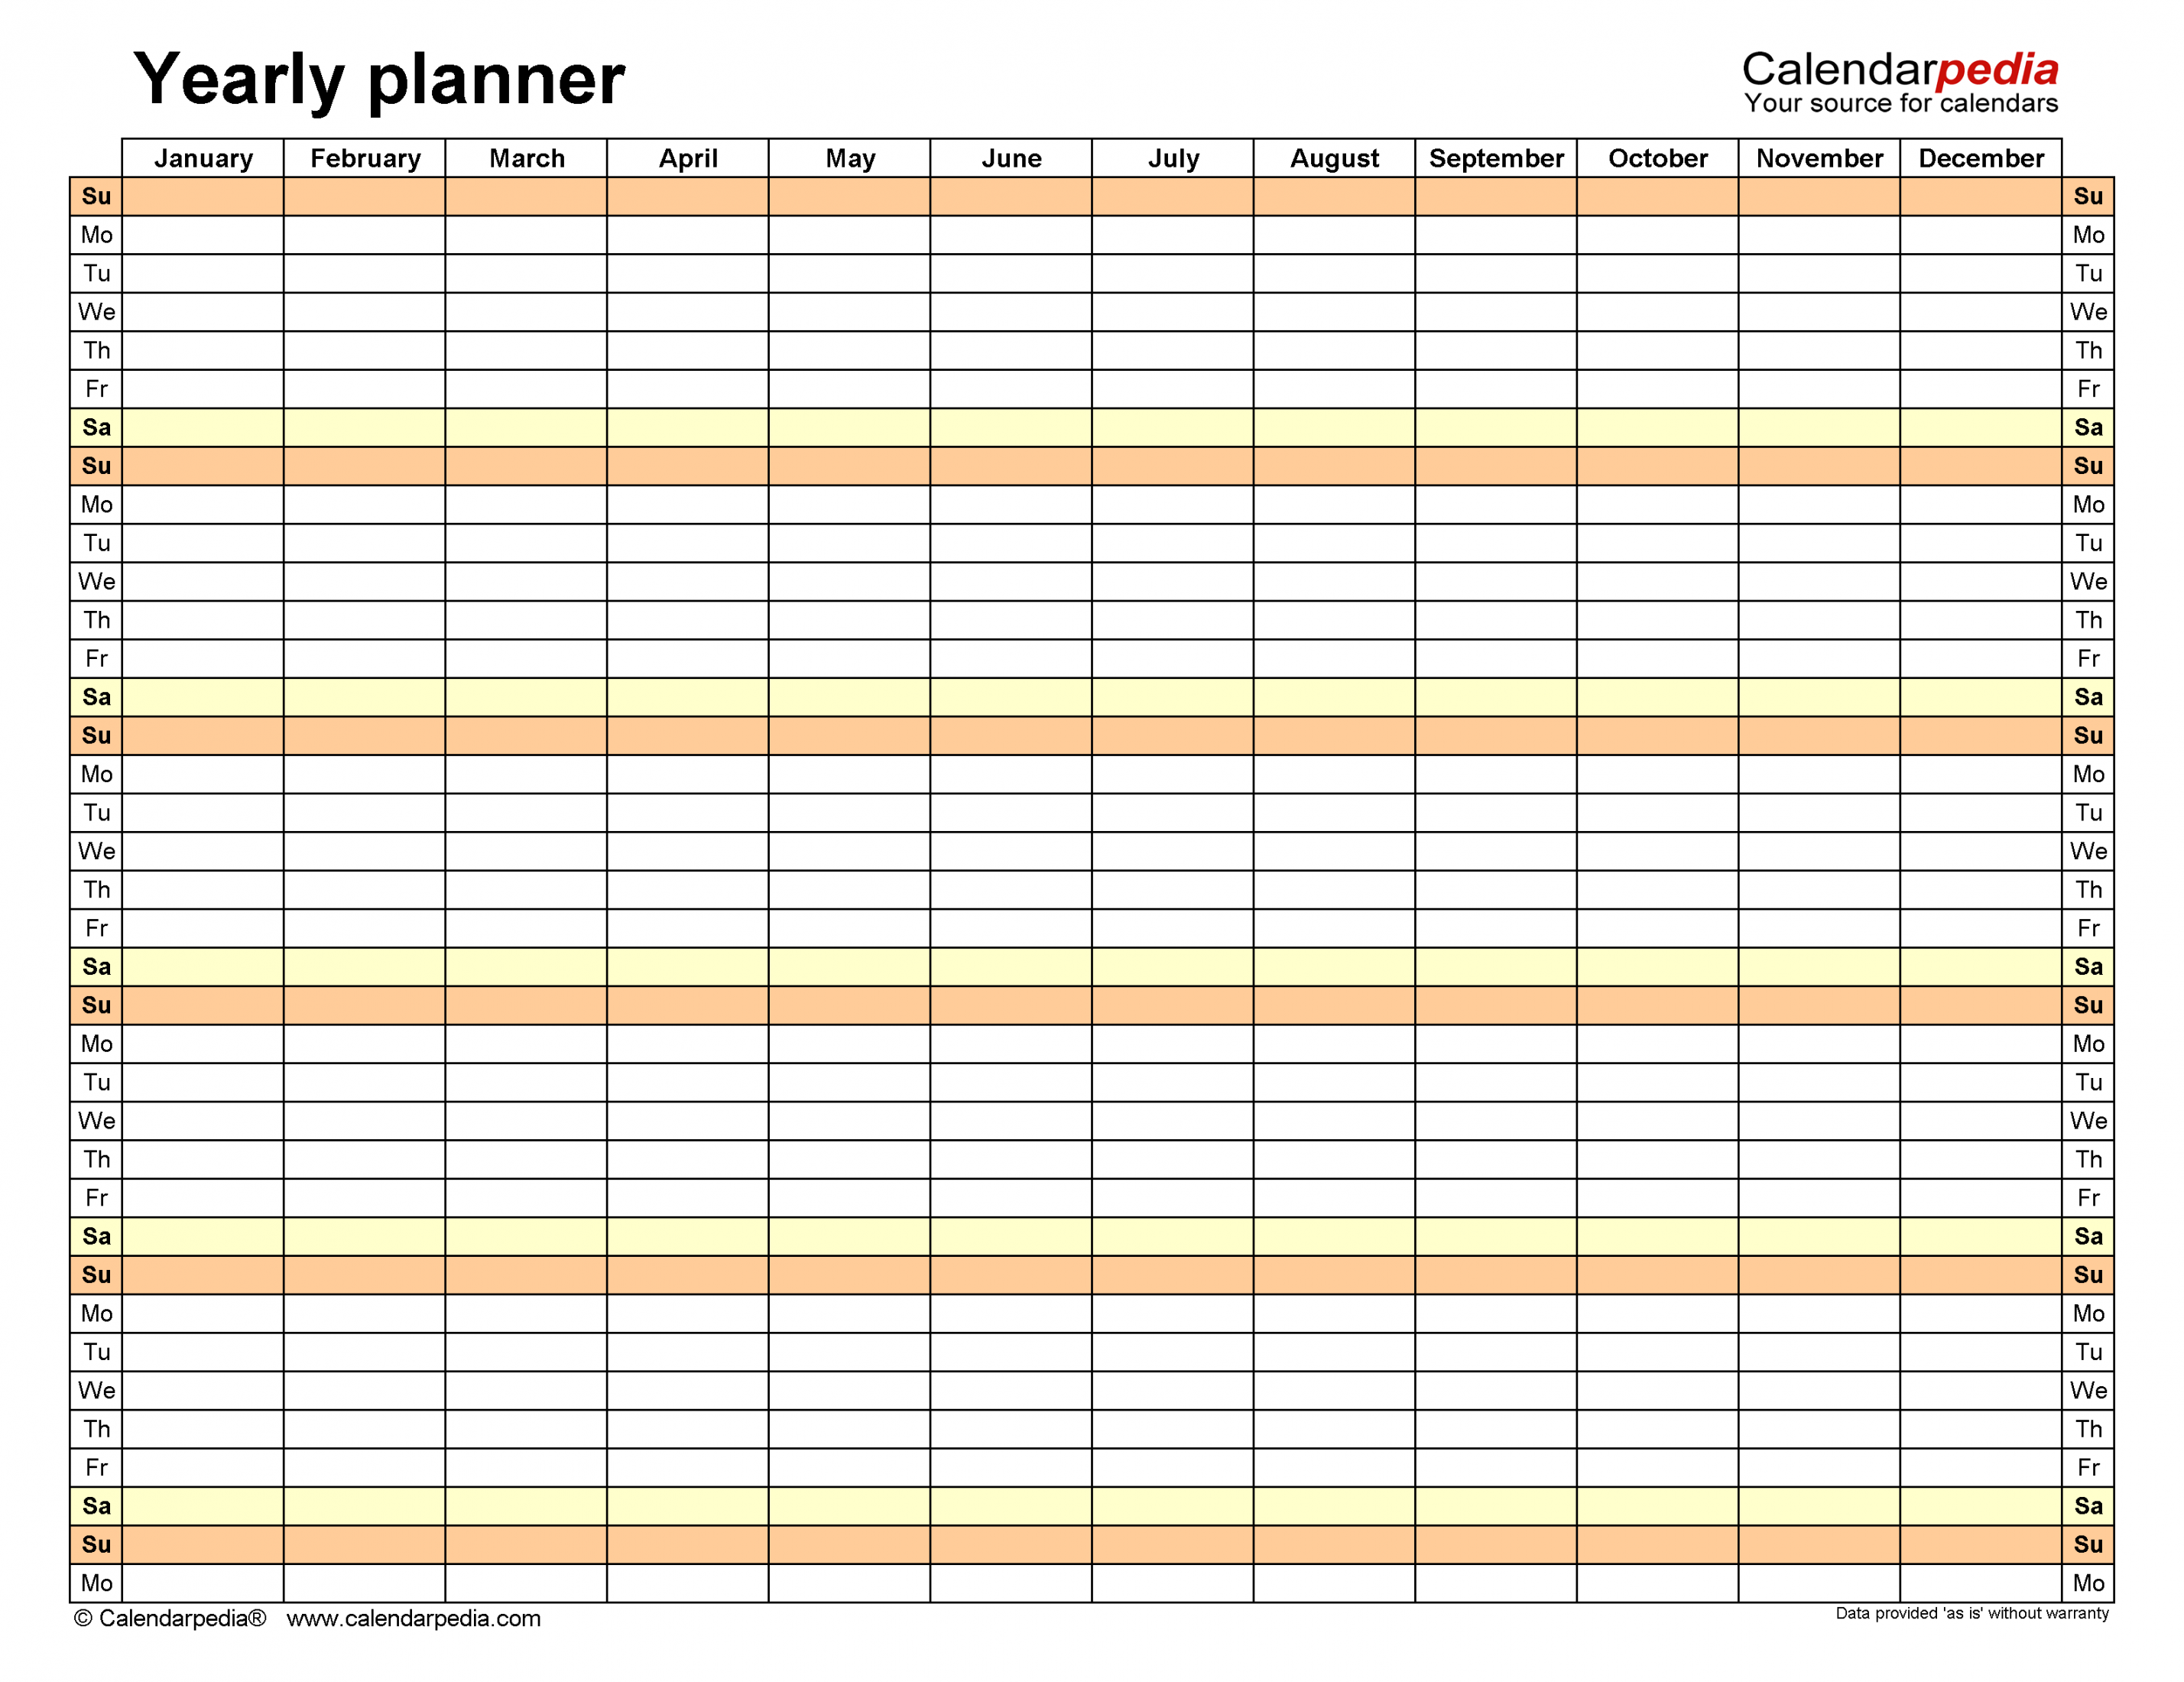 Yearly Planners in Microsoft Excel Format -  Templates